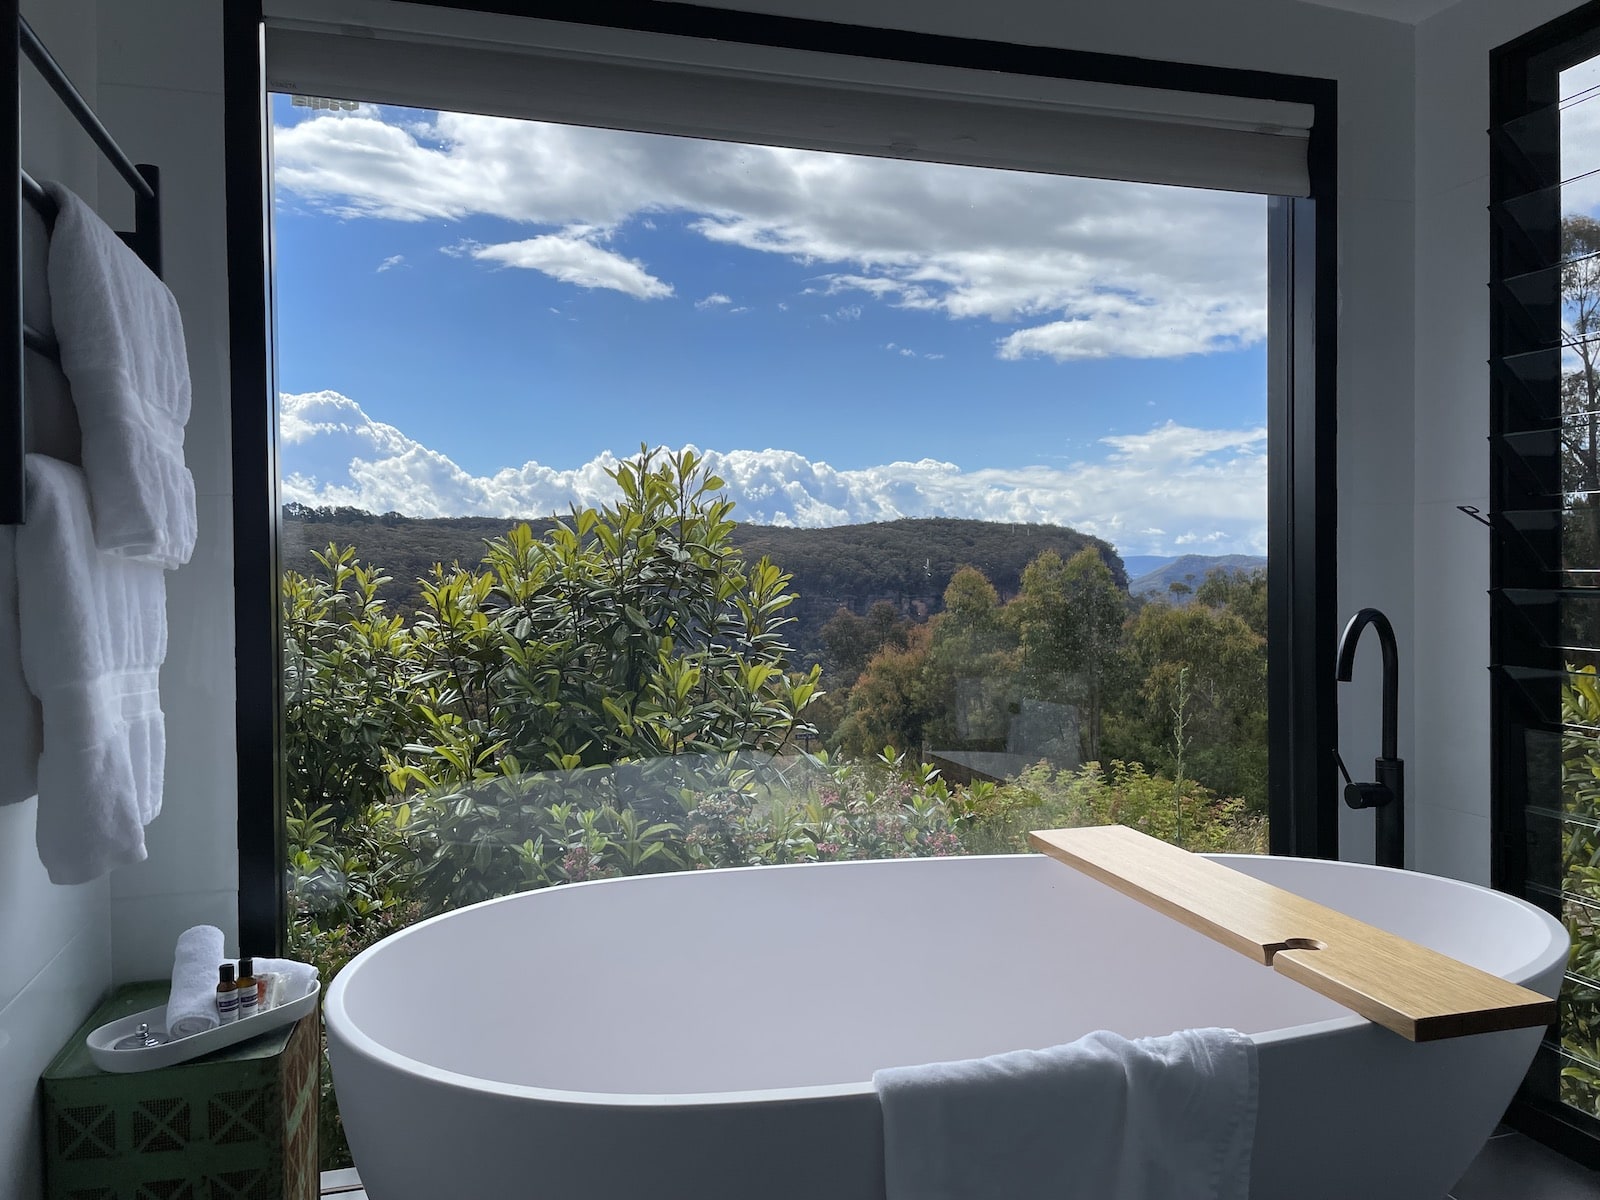 A white indoor bathtub with a view looking out to the mountains